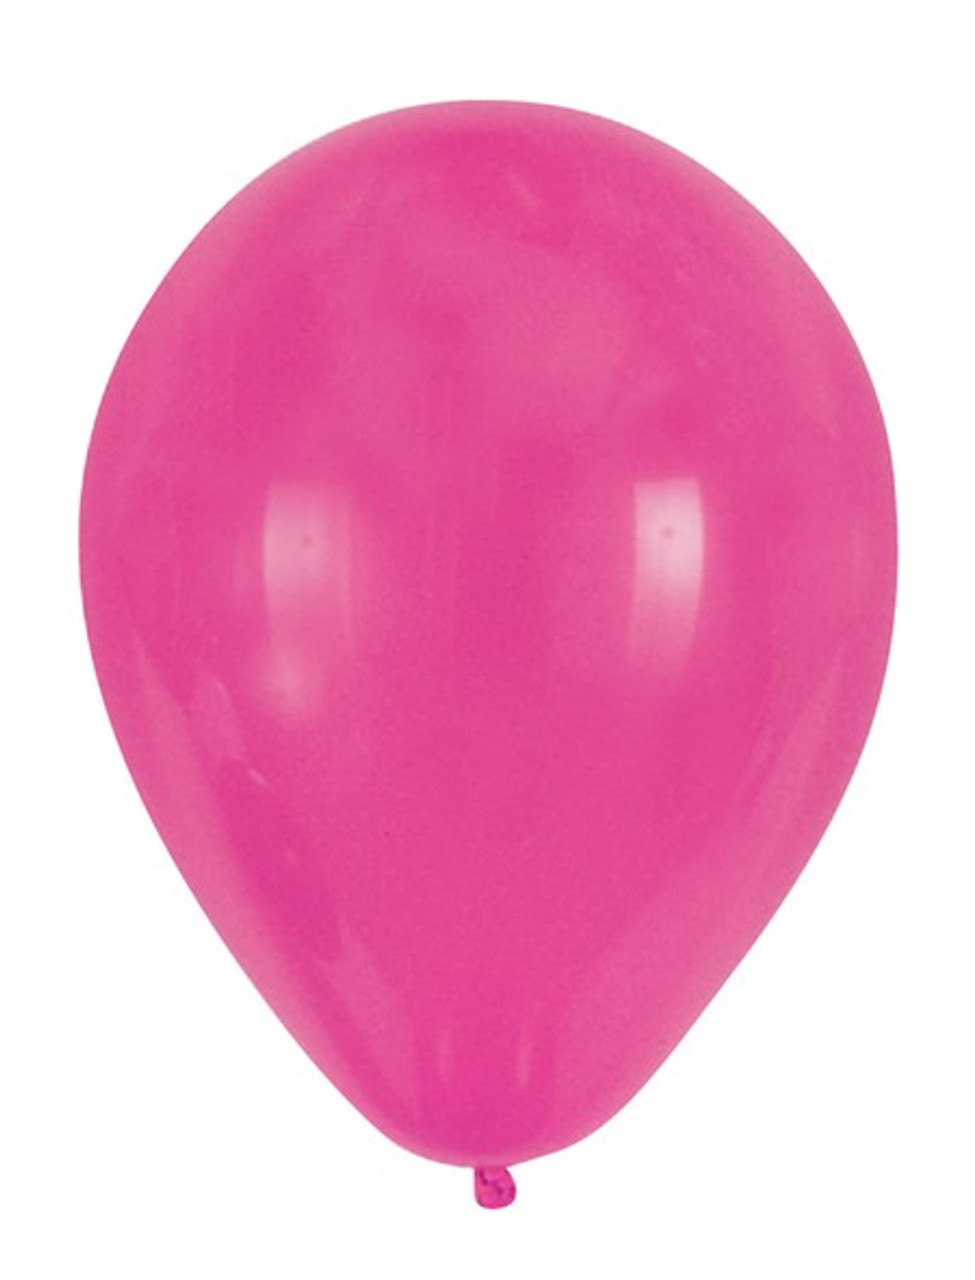 Pink Balloon Weights for Birthday Party Decorations (6 oz, 4.5 in, 15 Pack)